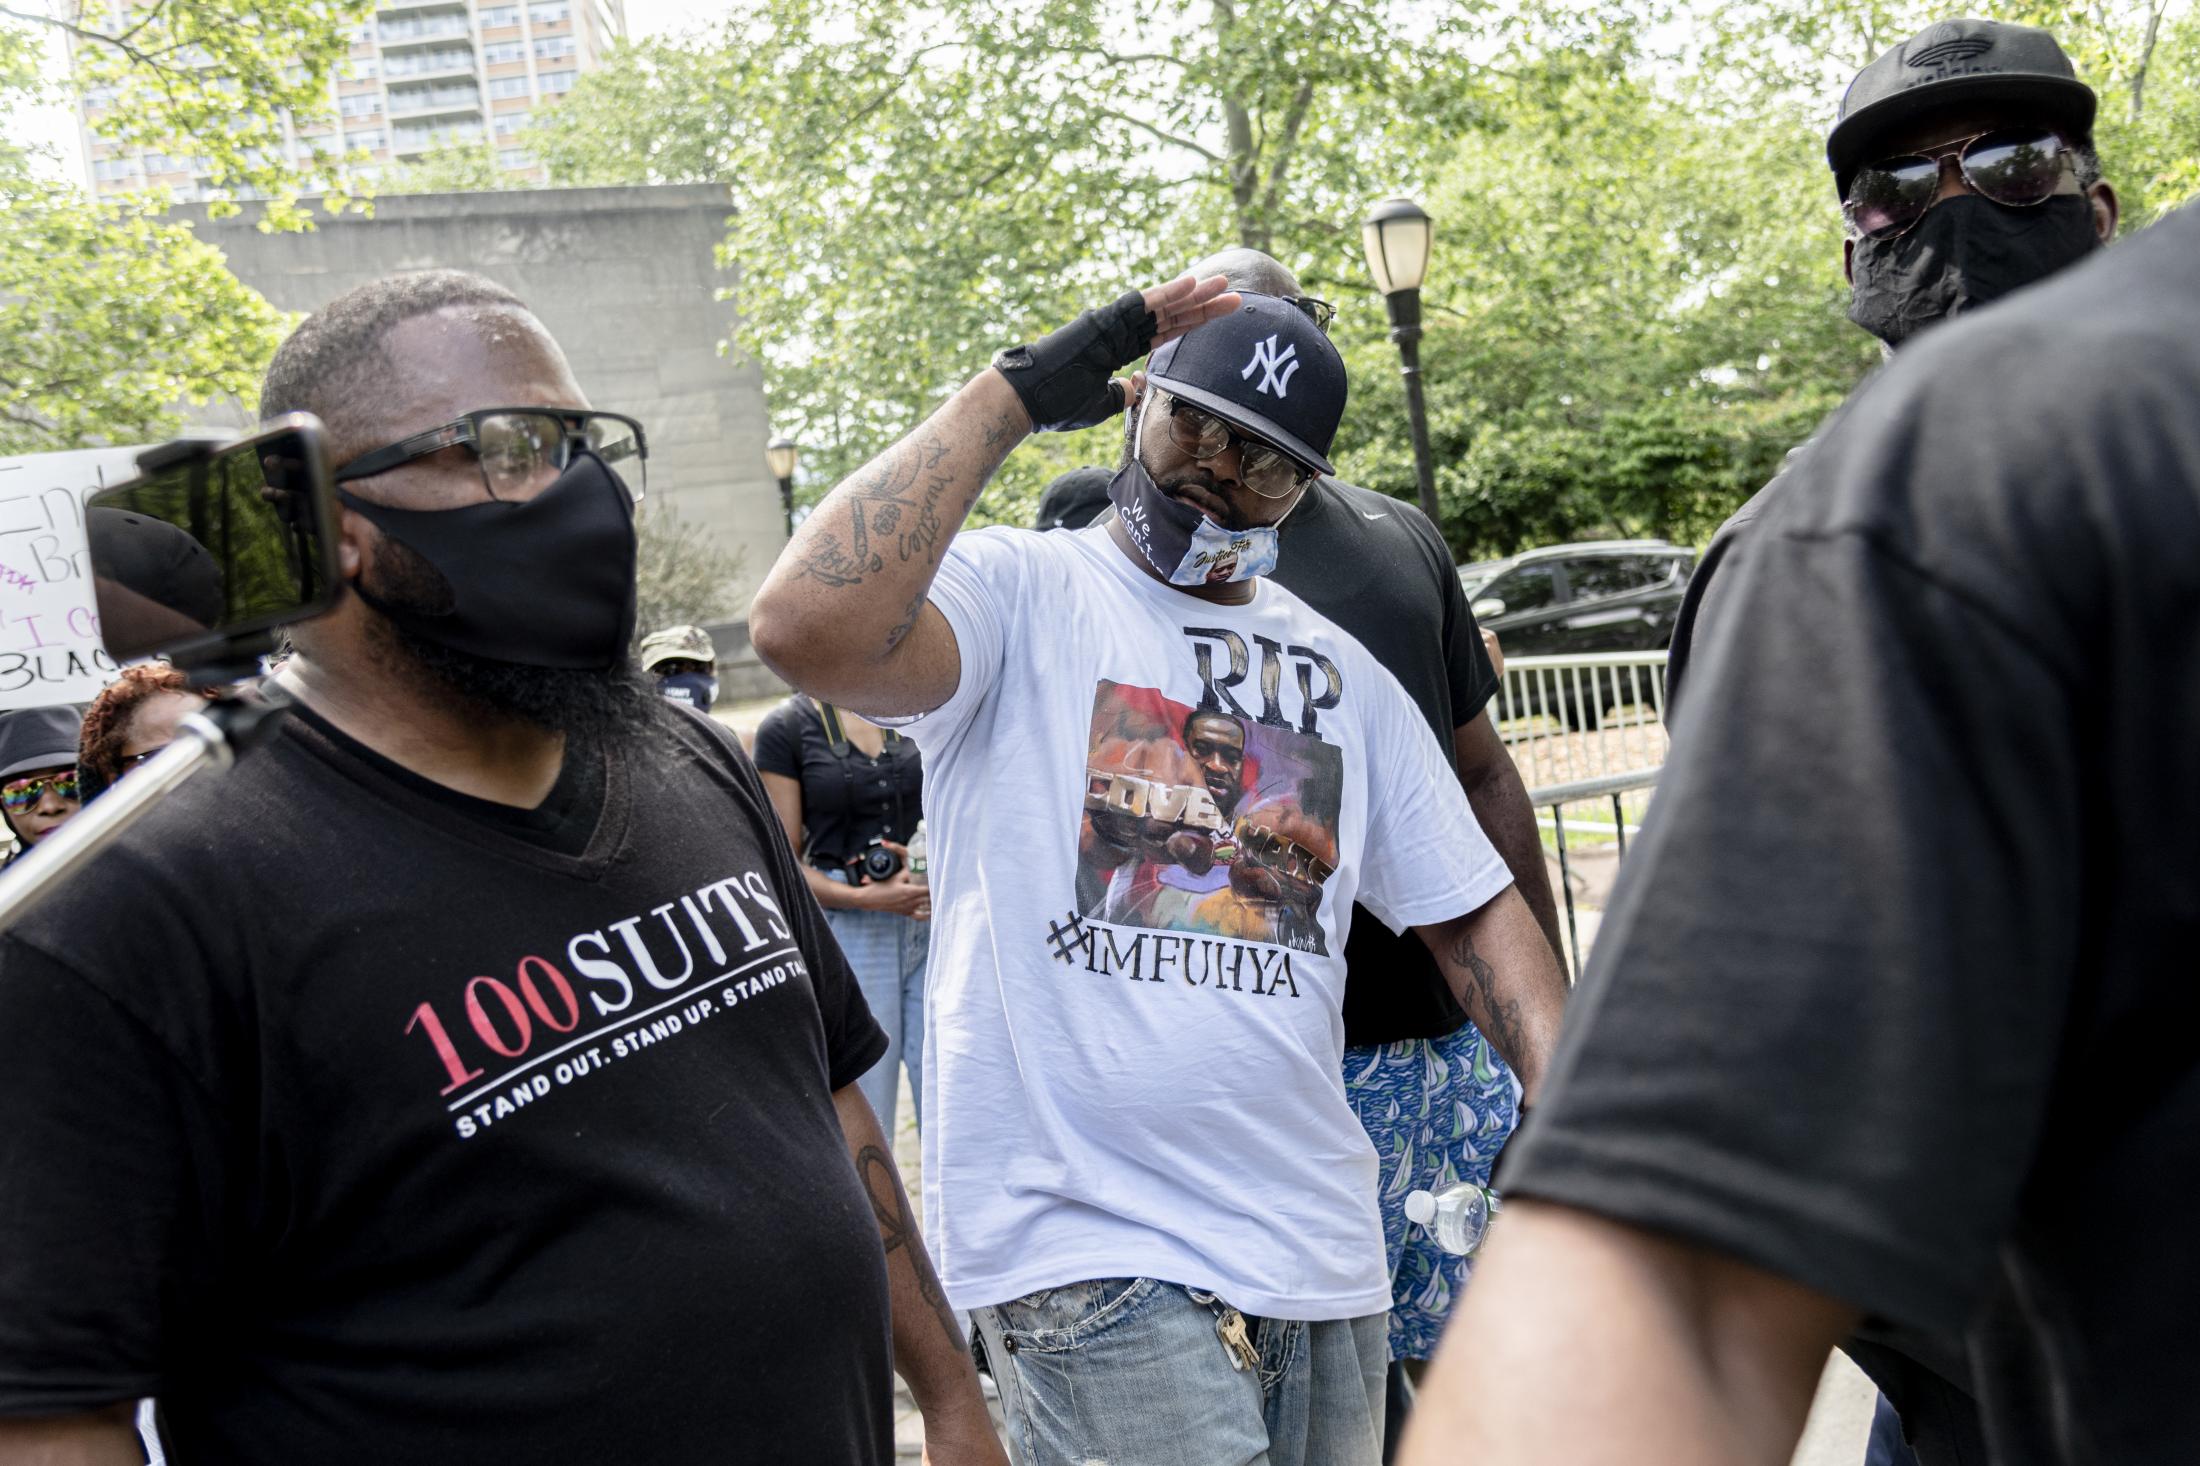 Terrance Floyd, George&#39;s Floyd brother arrives at a protest in New York, invited by activist groups, after the first week of demonstrations across the country. New York, May 2020.